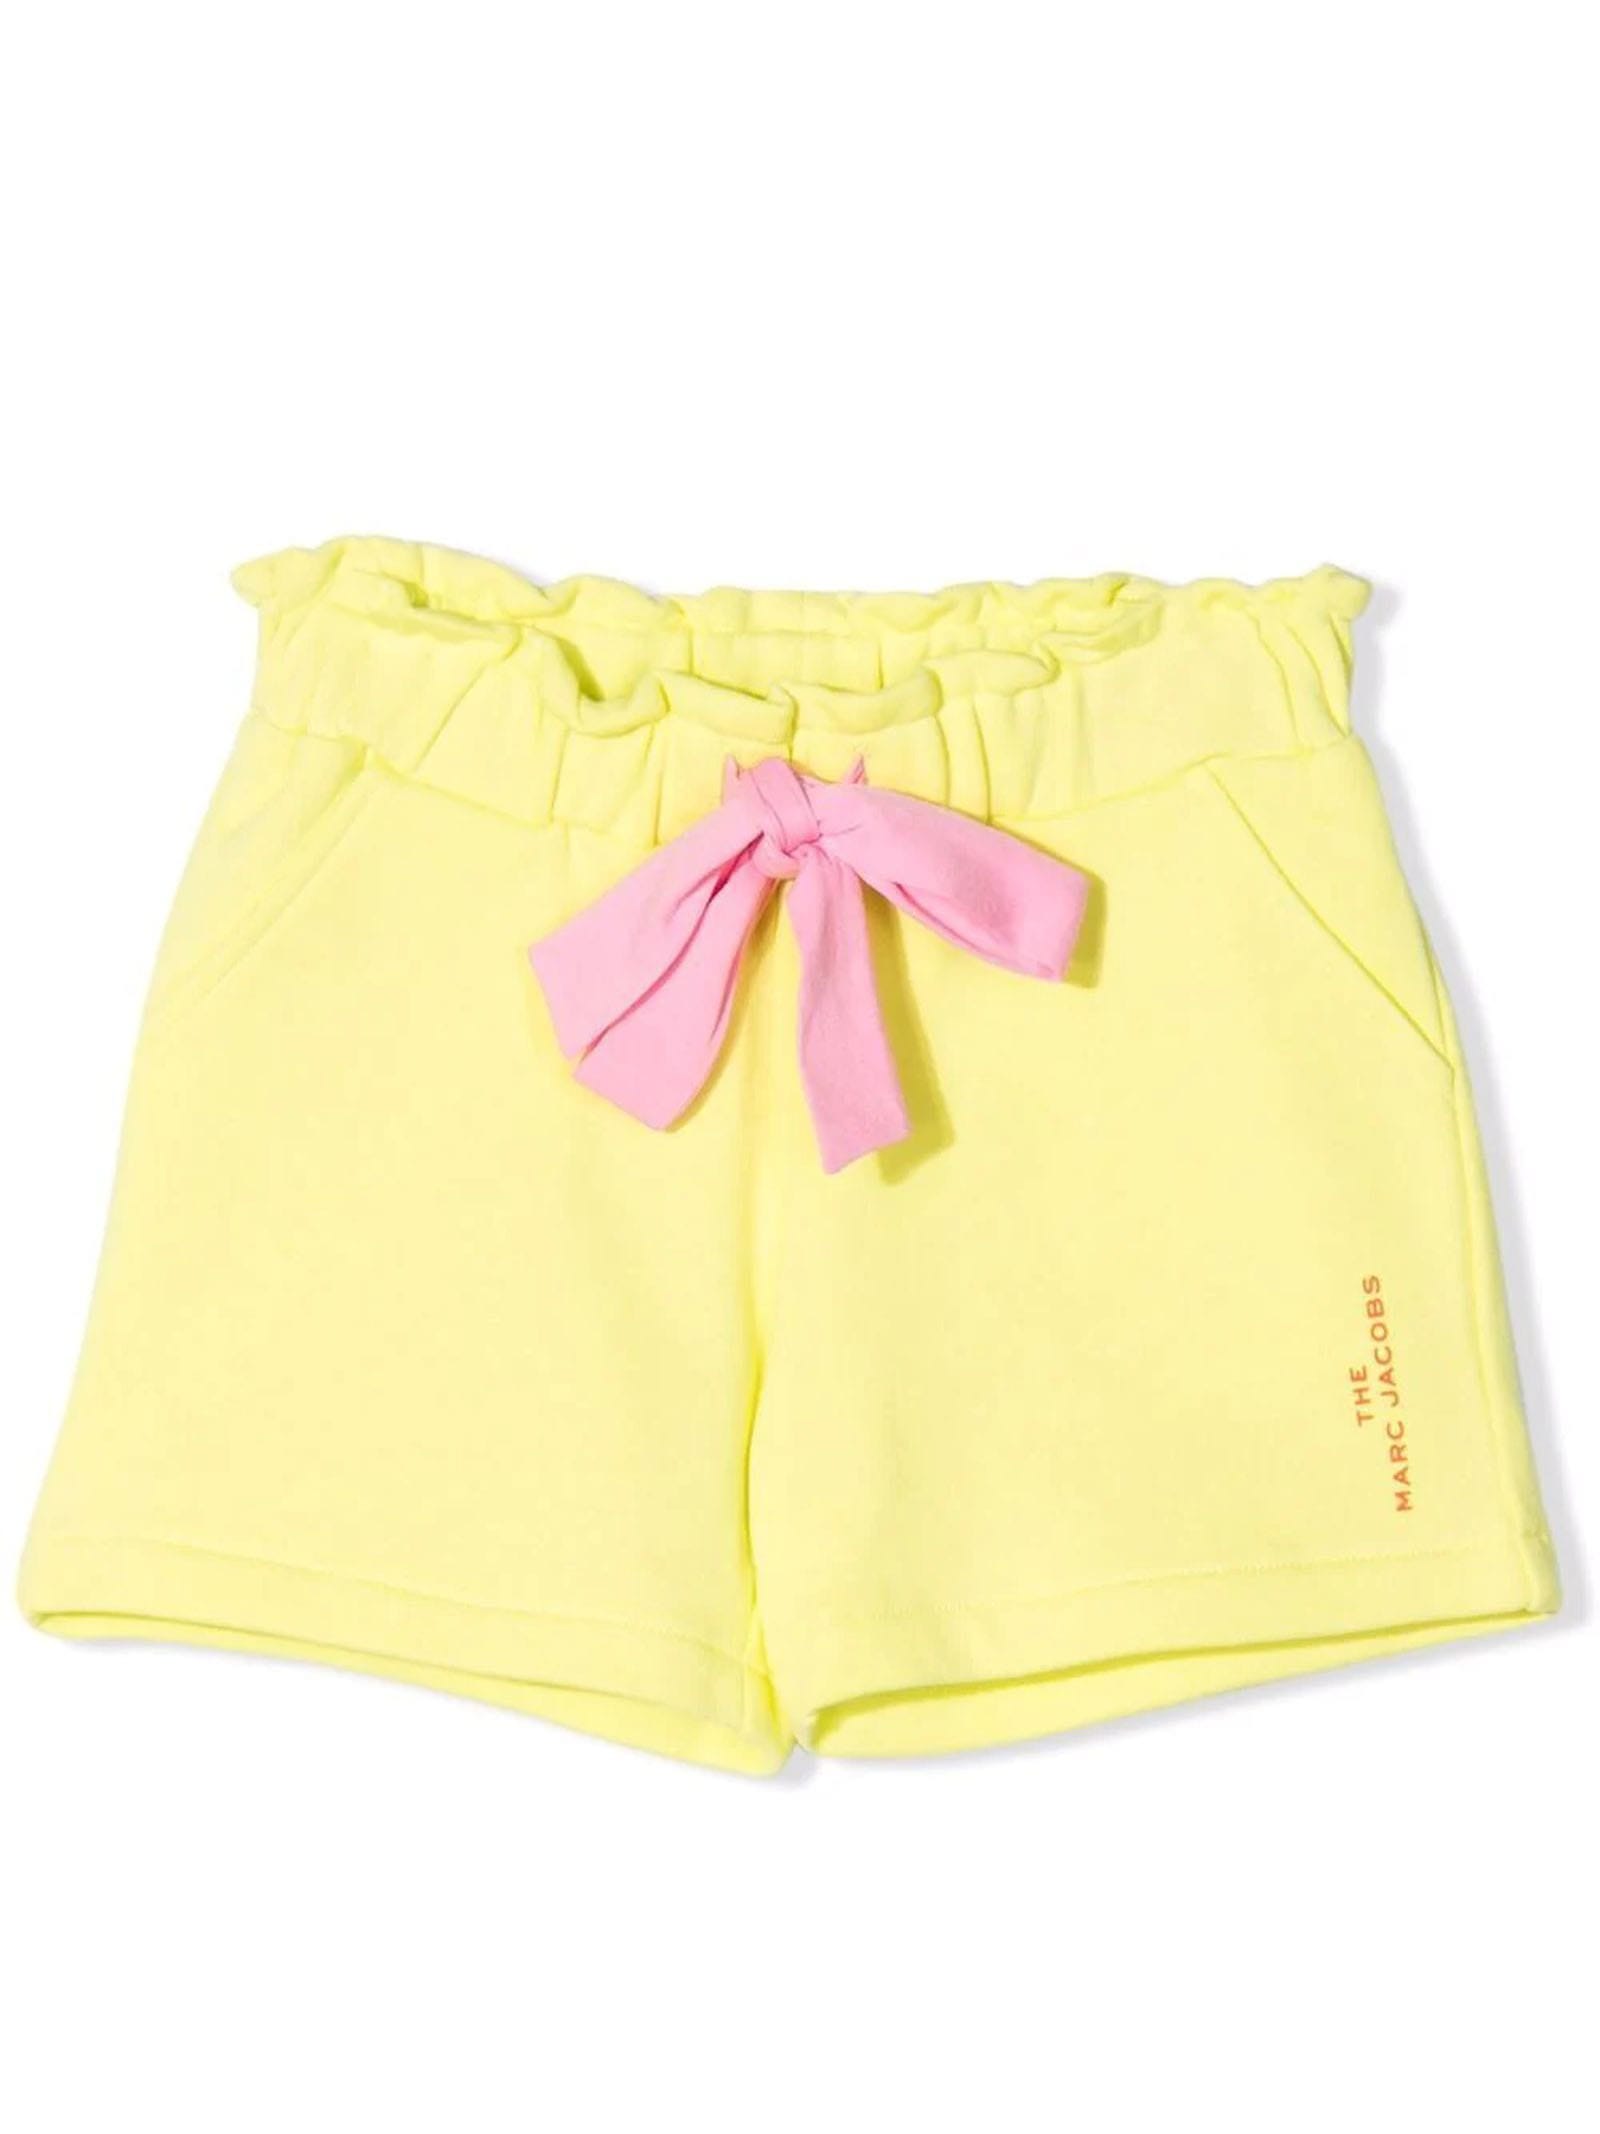 Marc Jacobs Yellow Cotton Shorts